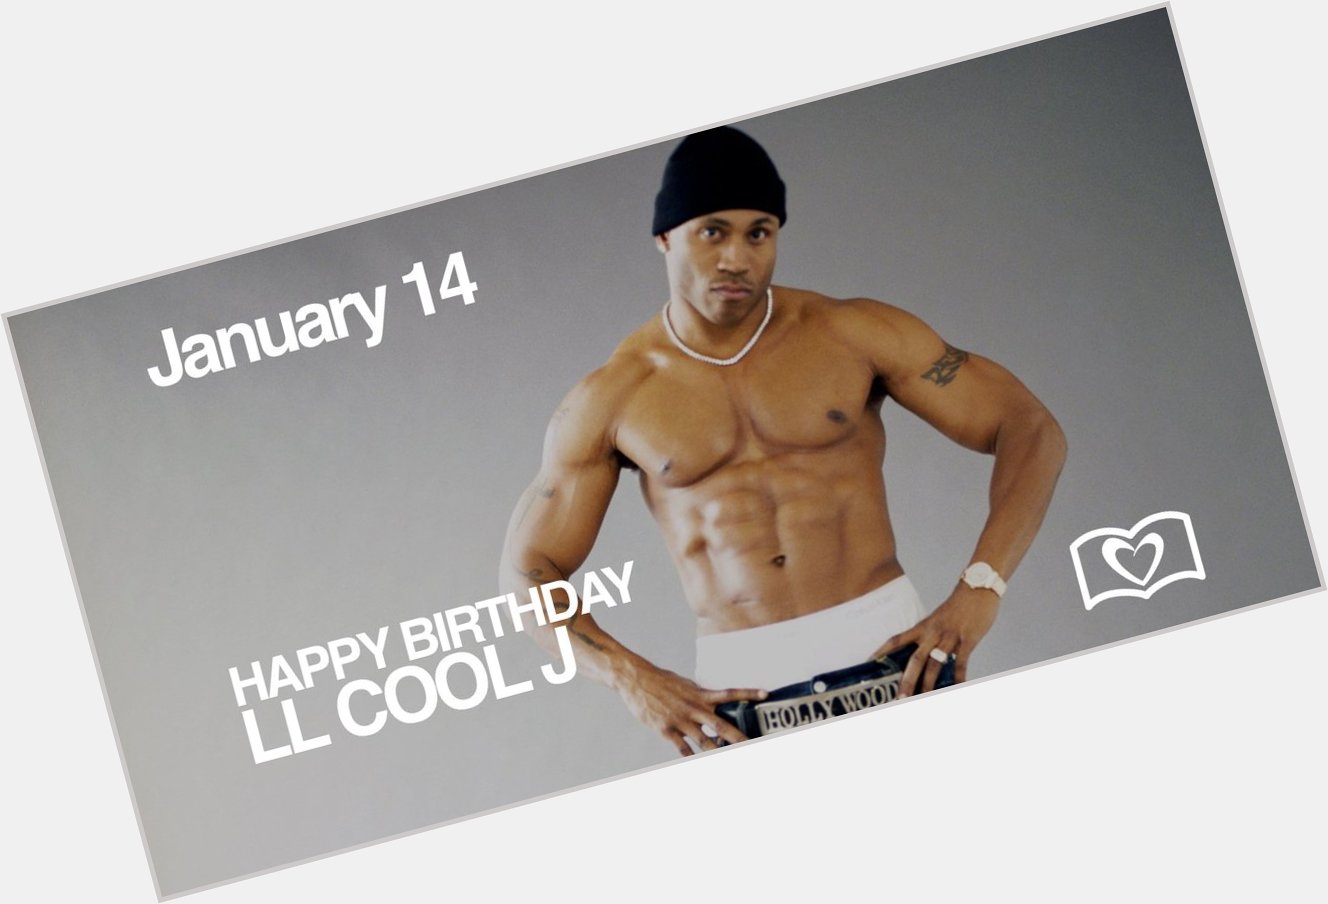 Happy Birthday LL COOL J! 
Doin It Well.. Much Love And Respect, From The 305. Miami 